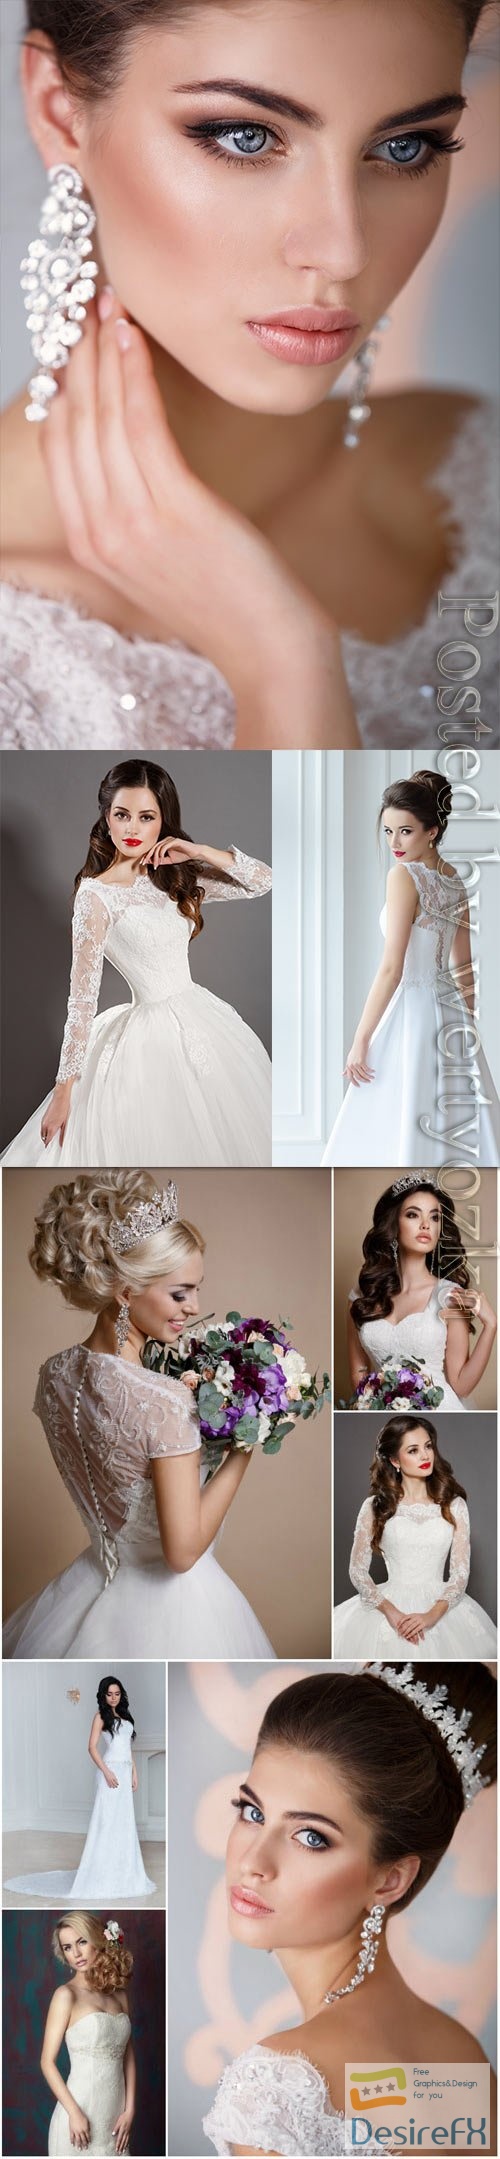 Brides in luxurious dresses stock photo